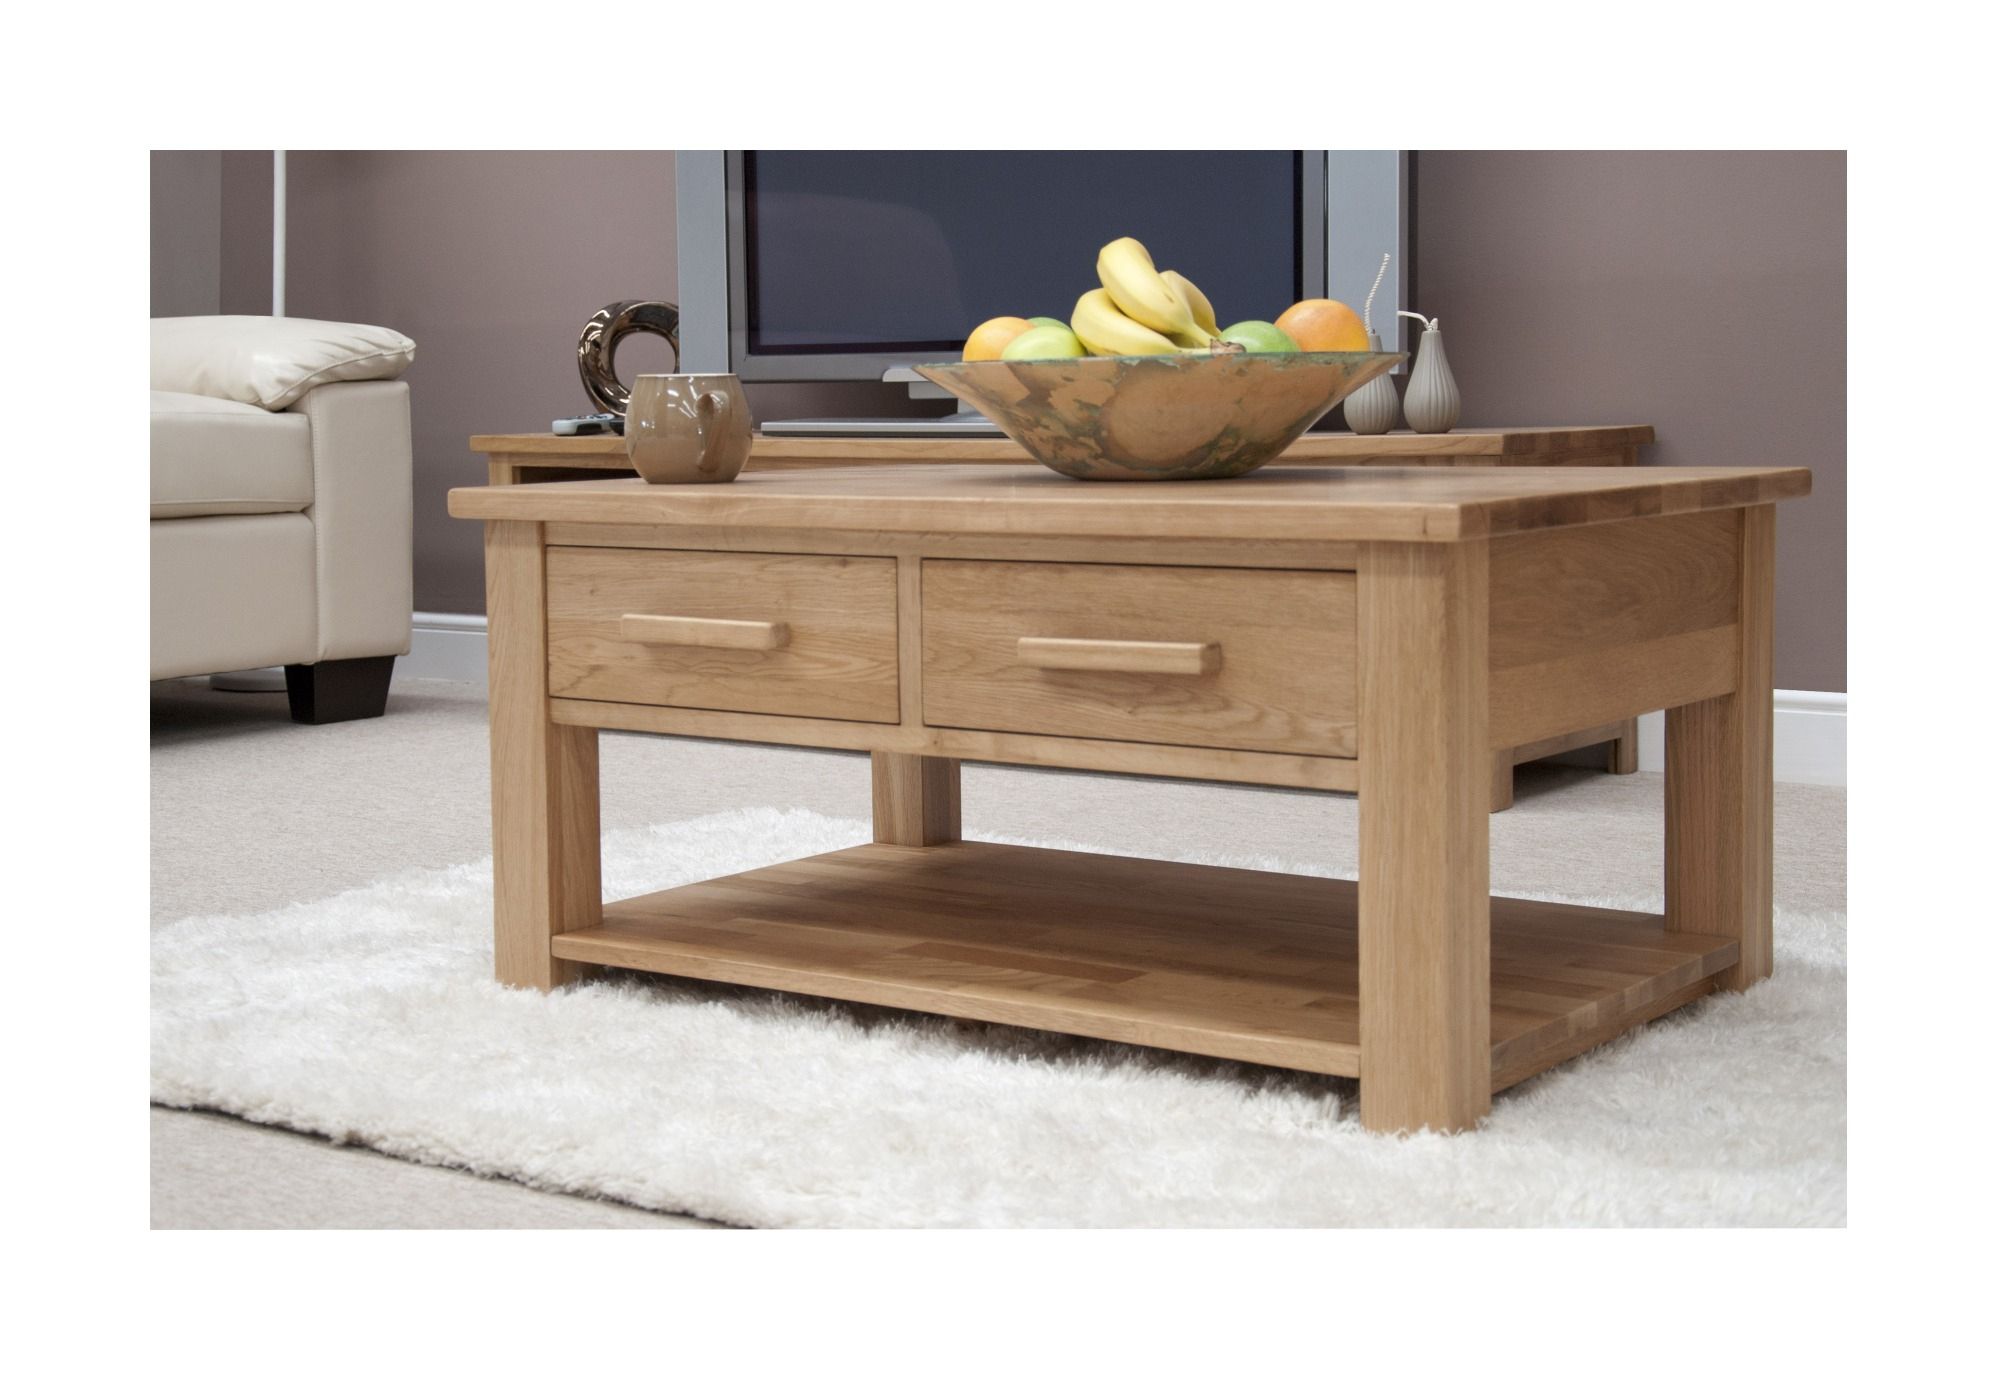 Modern 2 Drawer Coffee Table – Spirit Of Wood Intended For 2 Drawer Coffee Tables (View 4 of 20)